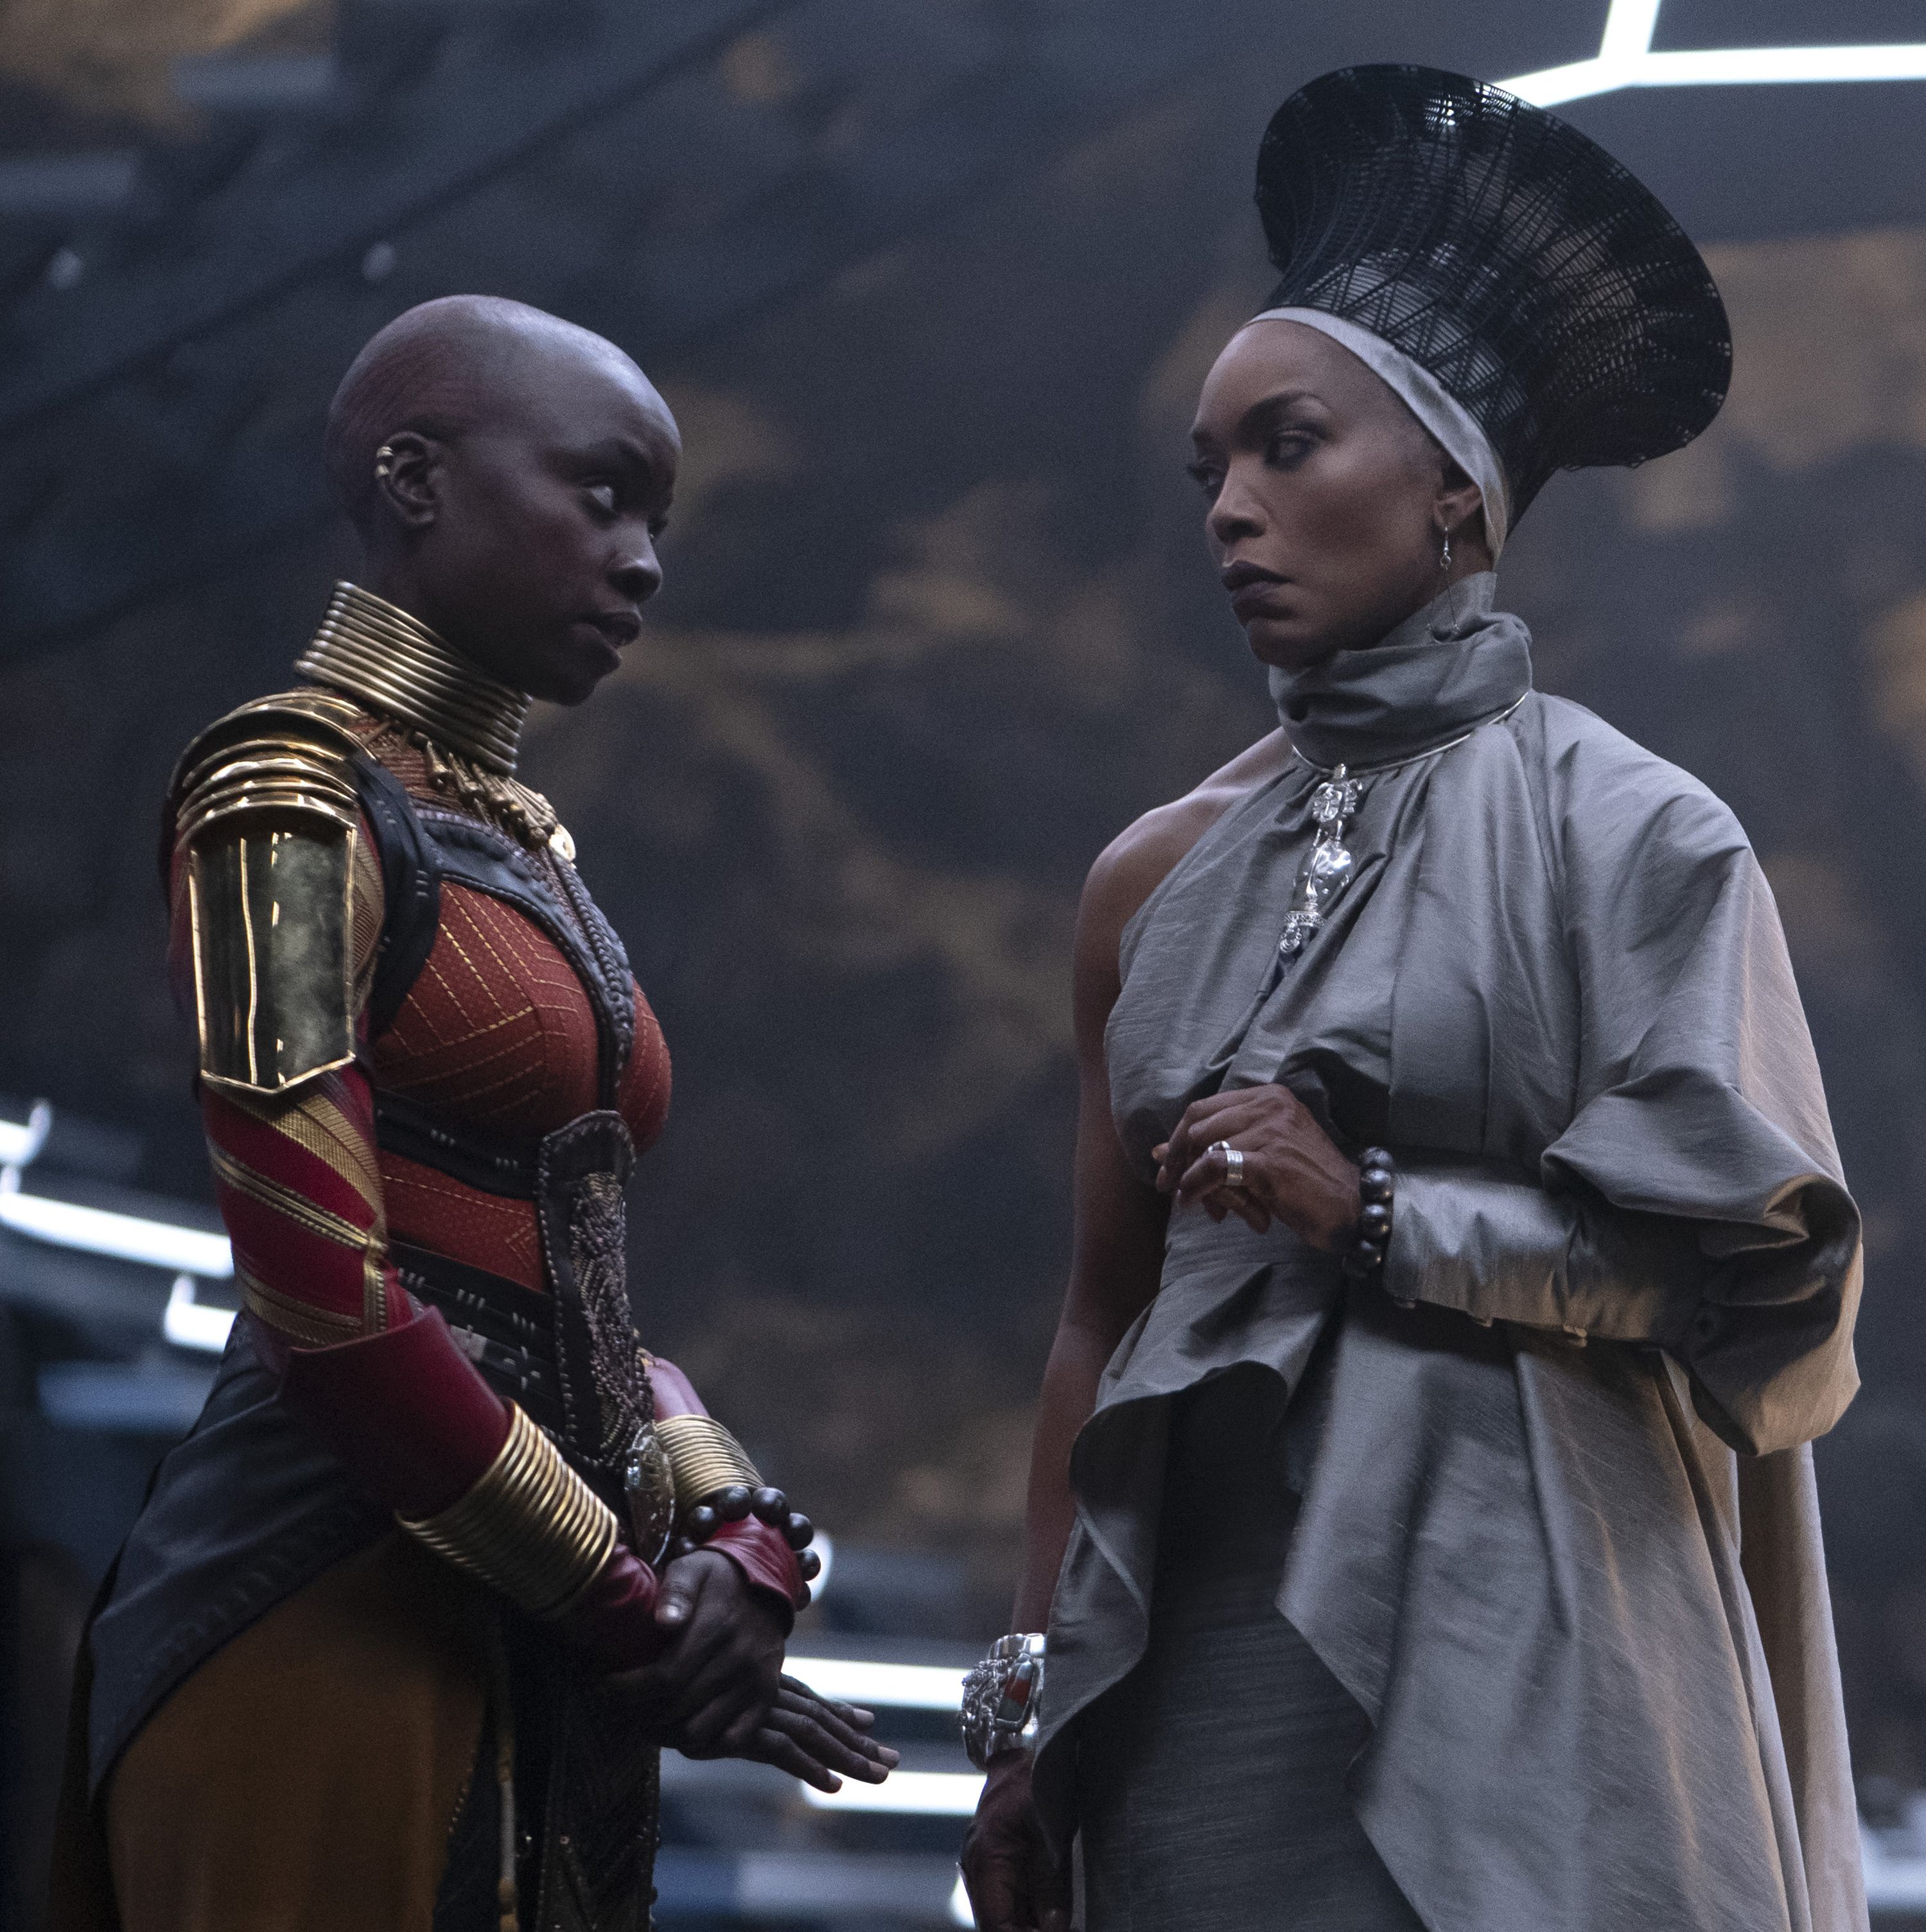 Black Women Are the Heart and Soul of 'Wakanda Forever'